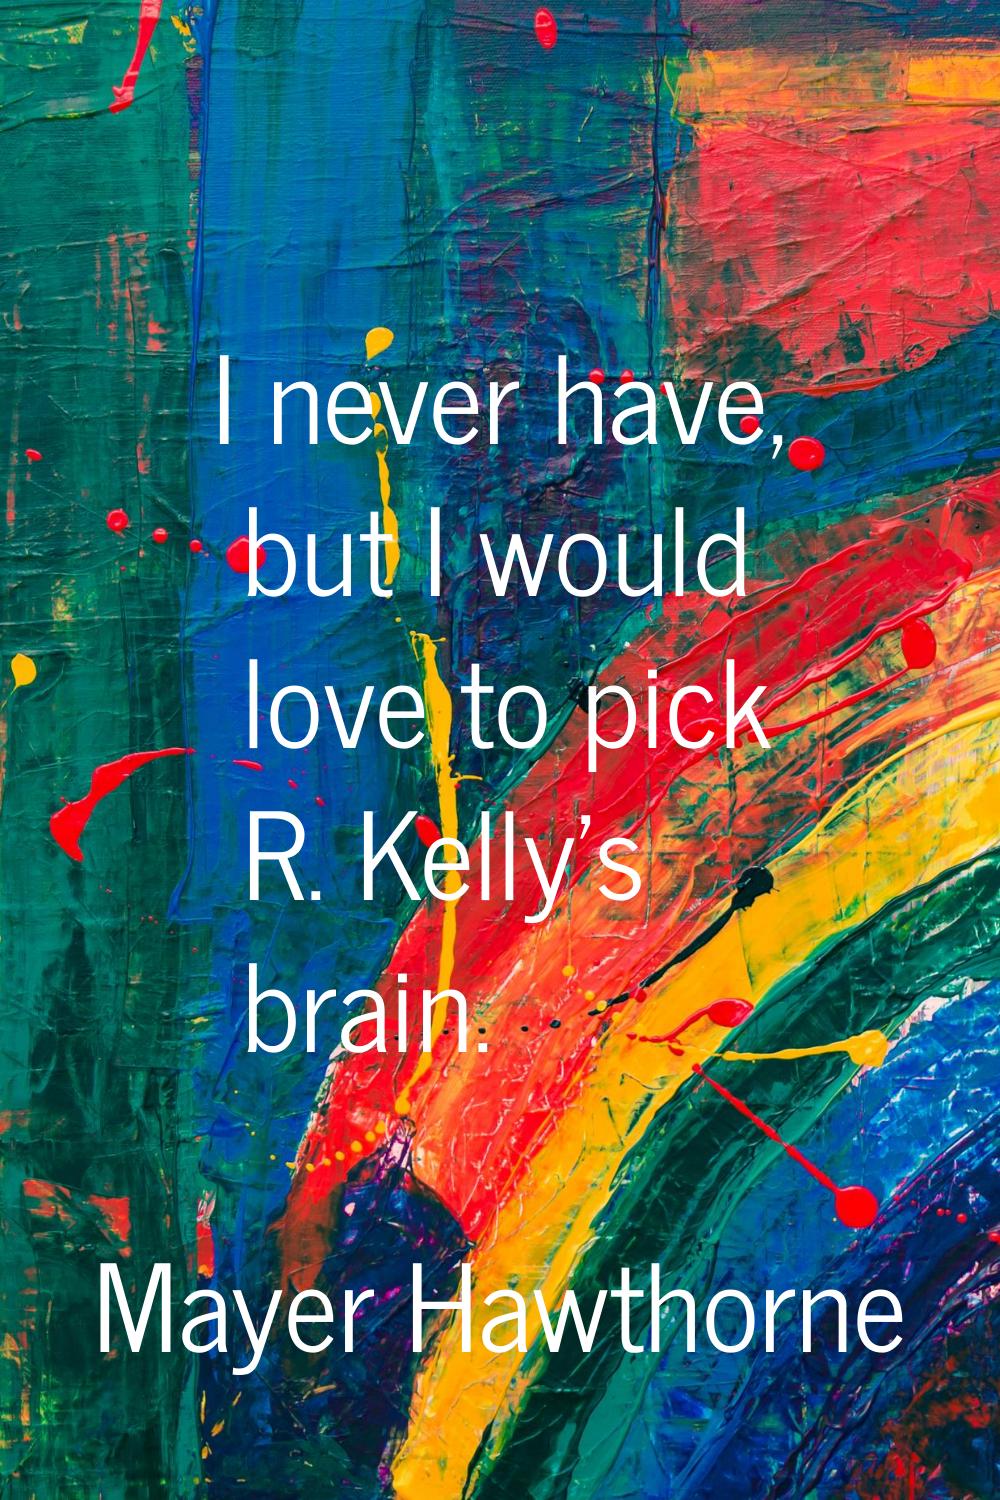 I never have, but I would love to pick R. Kelly's brain.